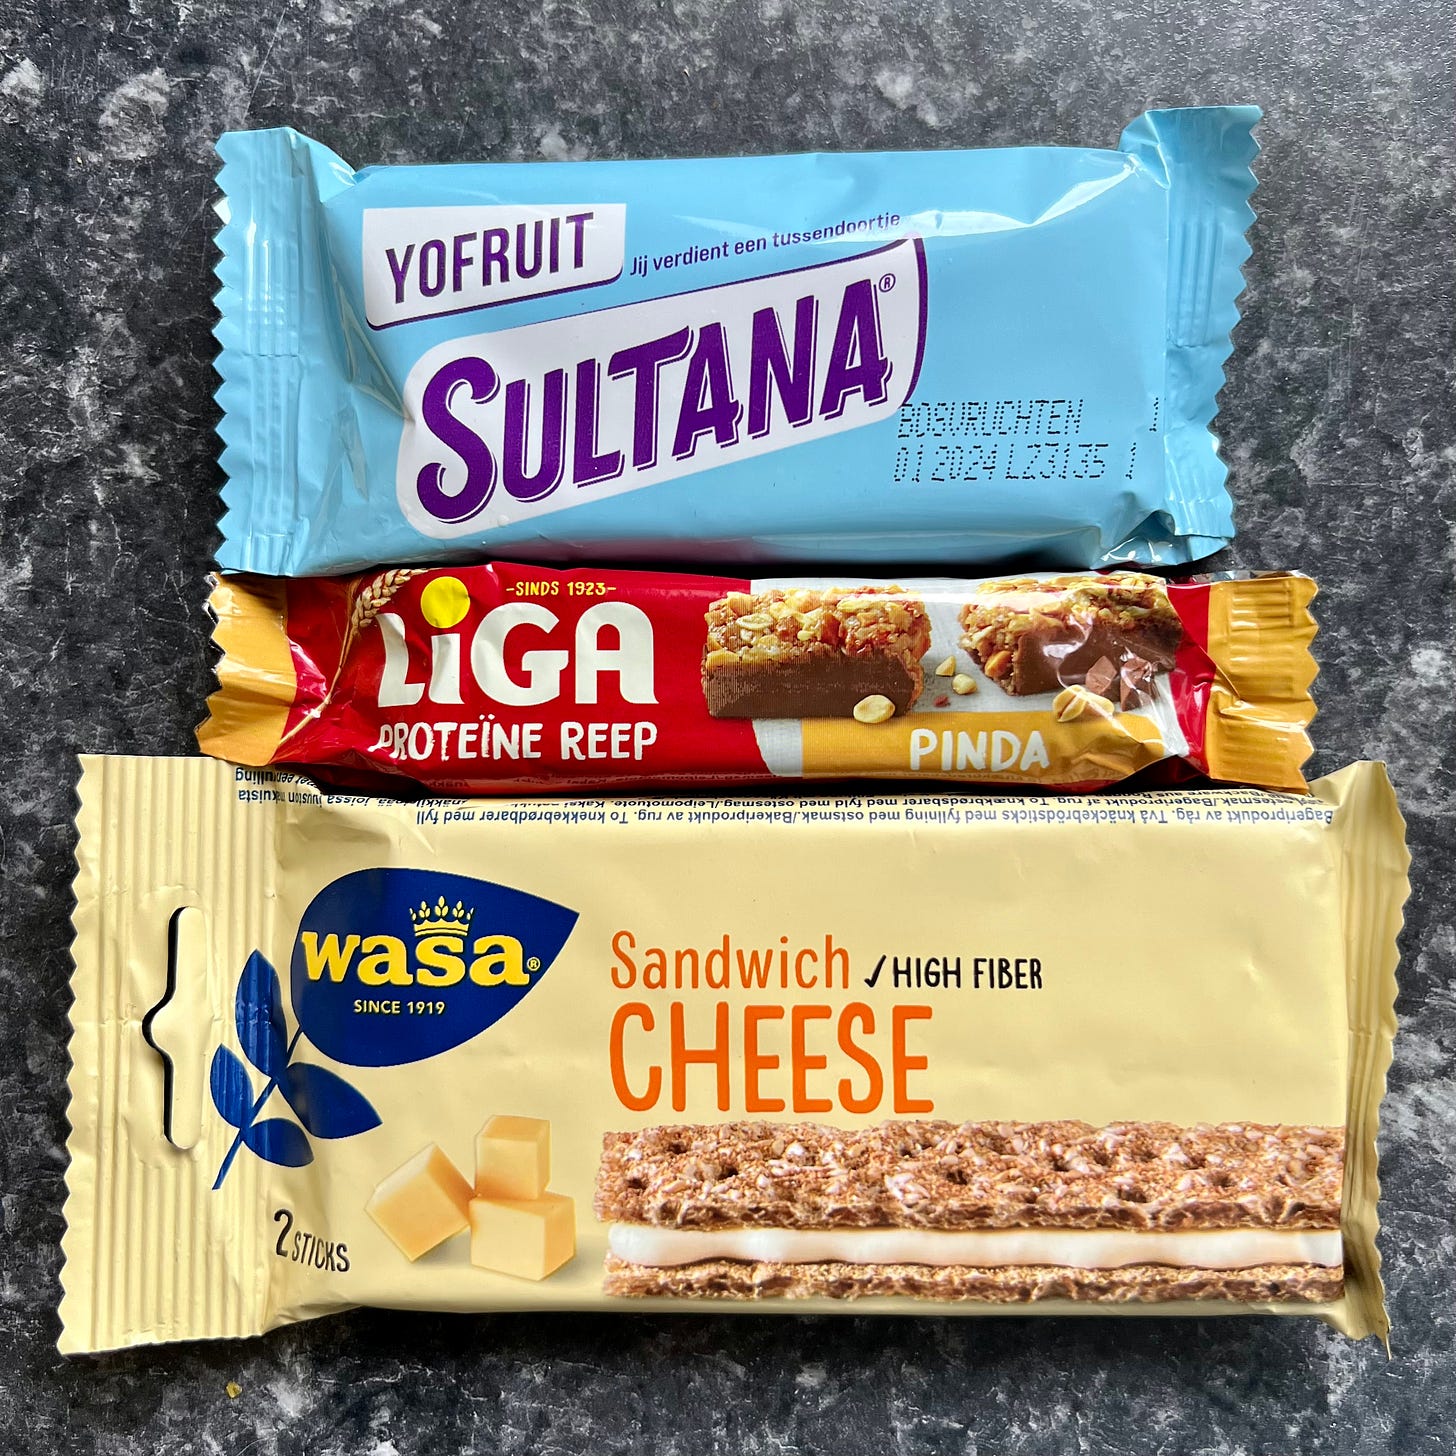 Three snack bars from the Netherlands, one called Yo Fruit Sultana, one called LIGA and another called WASA Sandwich Cheese.